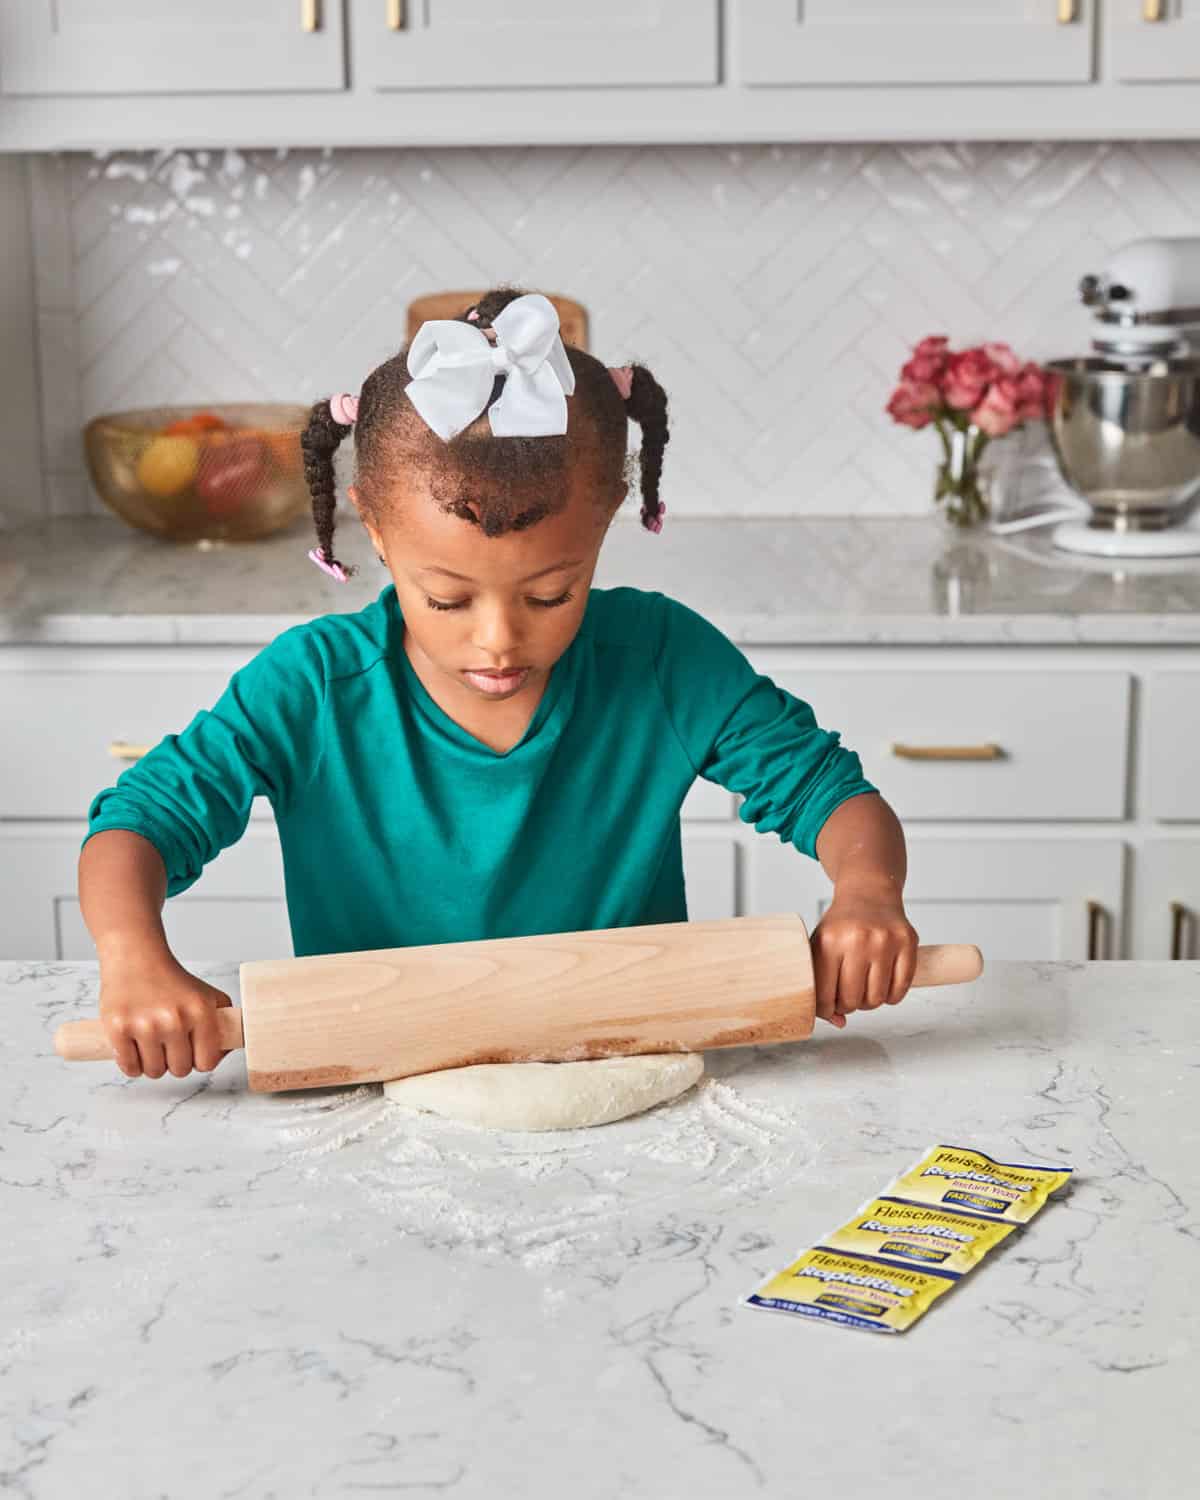 A young girl using a rolling pin on a pizza crust at the counter.